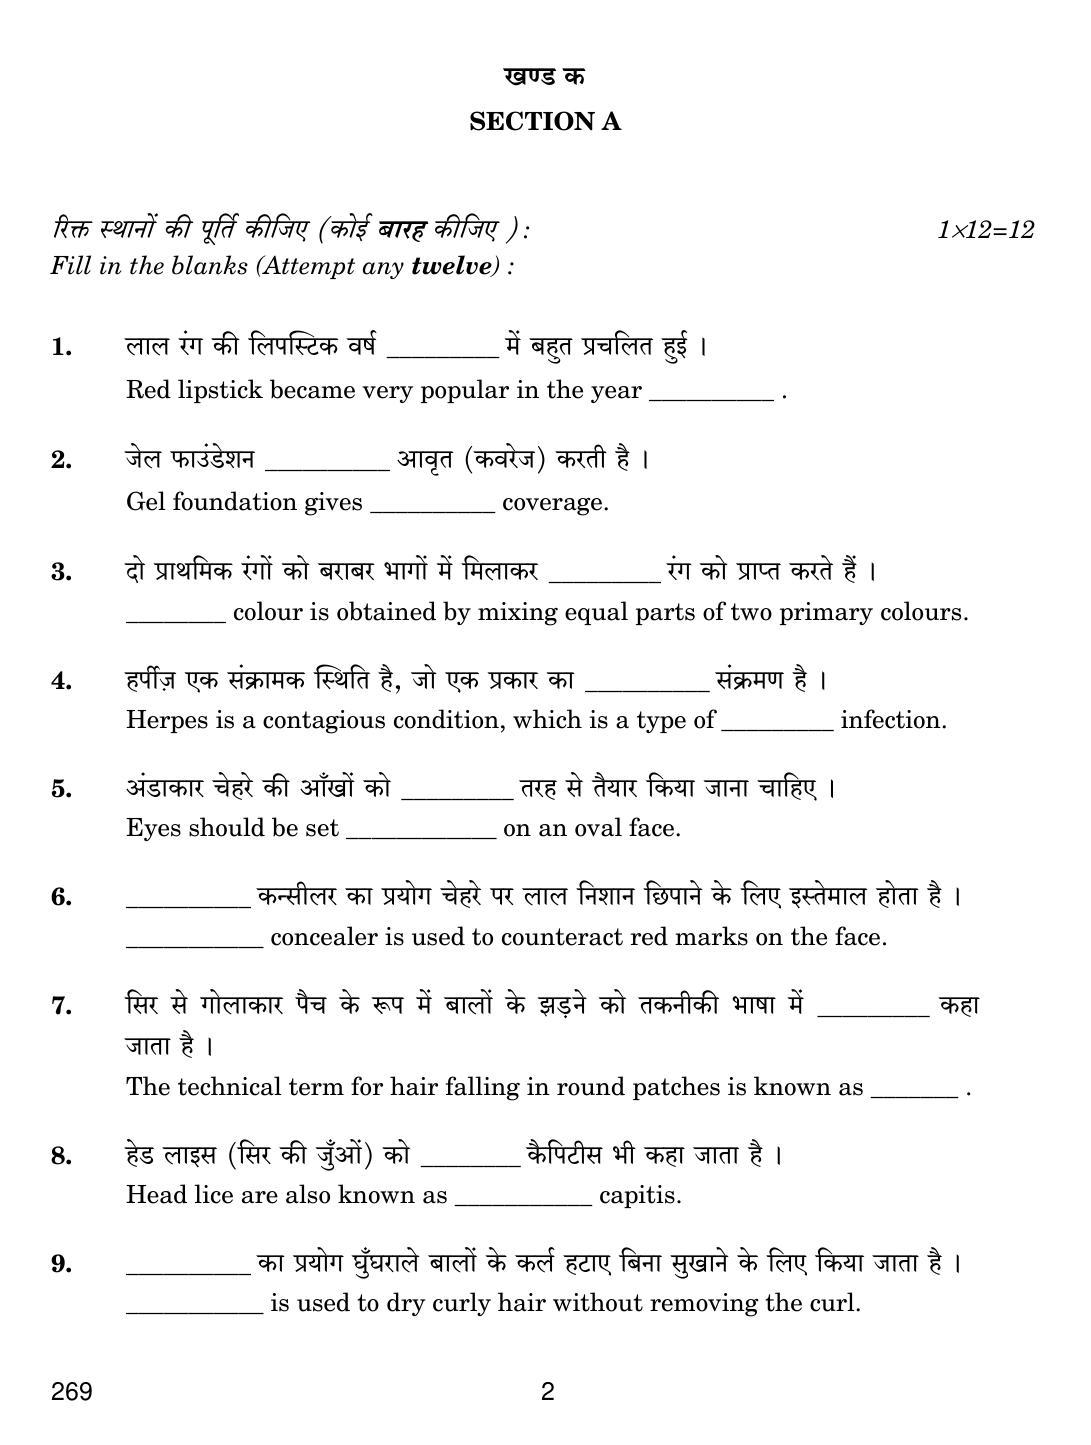 CBSE Class 12 269 BEAUTY AND HAIR 2018 Question Paper - Page 2